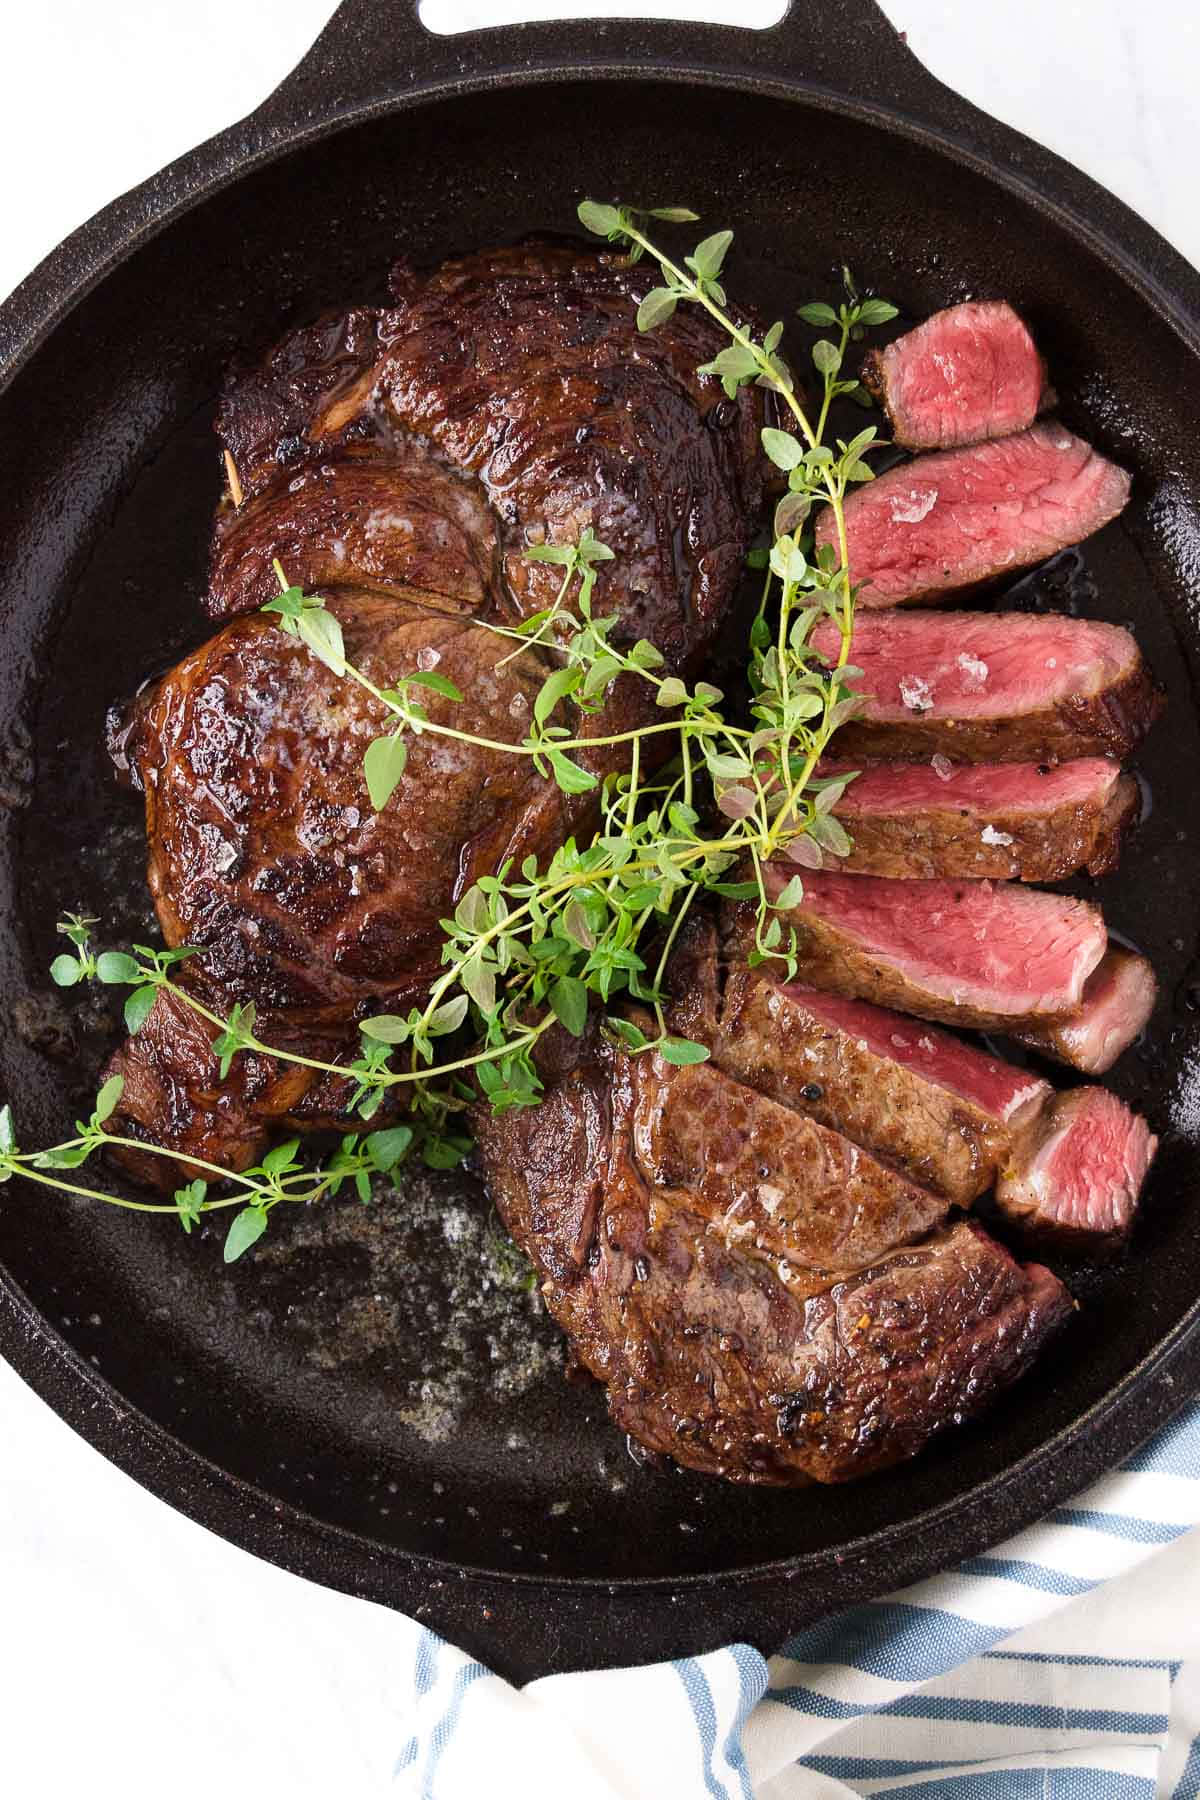 A Steak Is Being Cooked In A Cast Iron Skillet